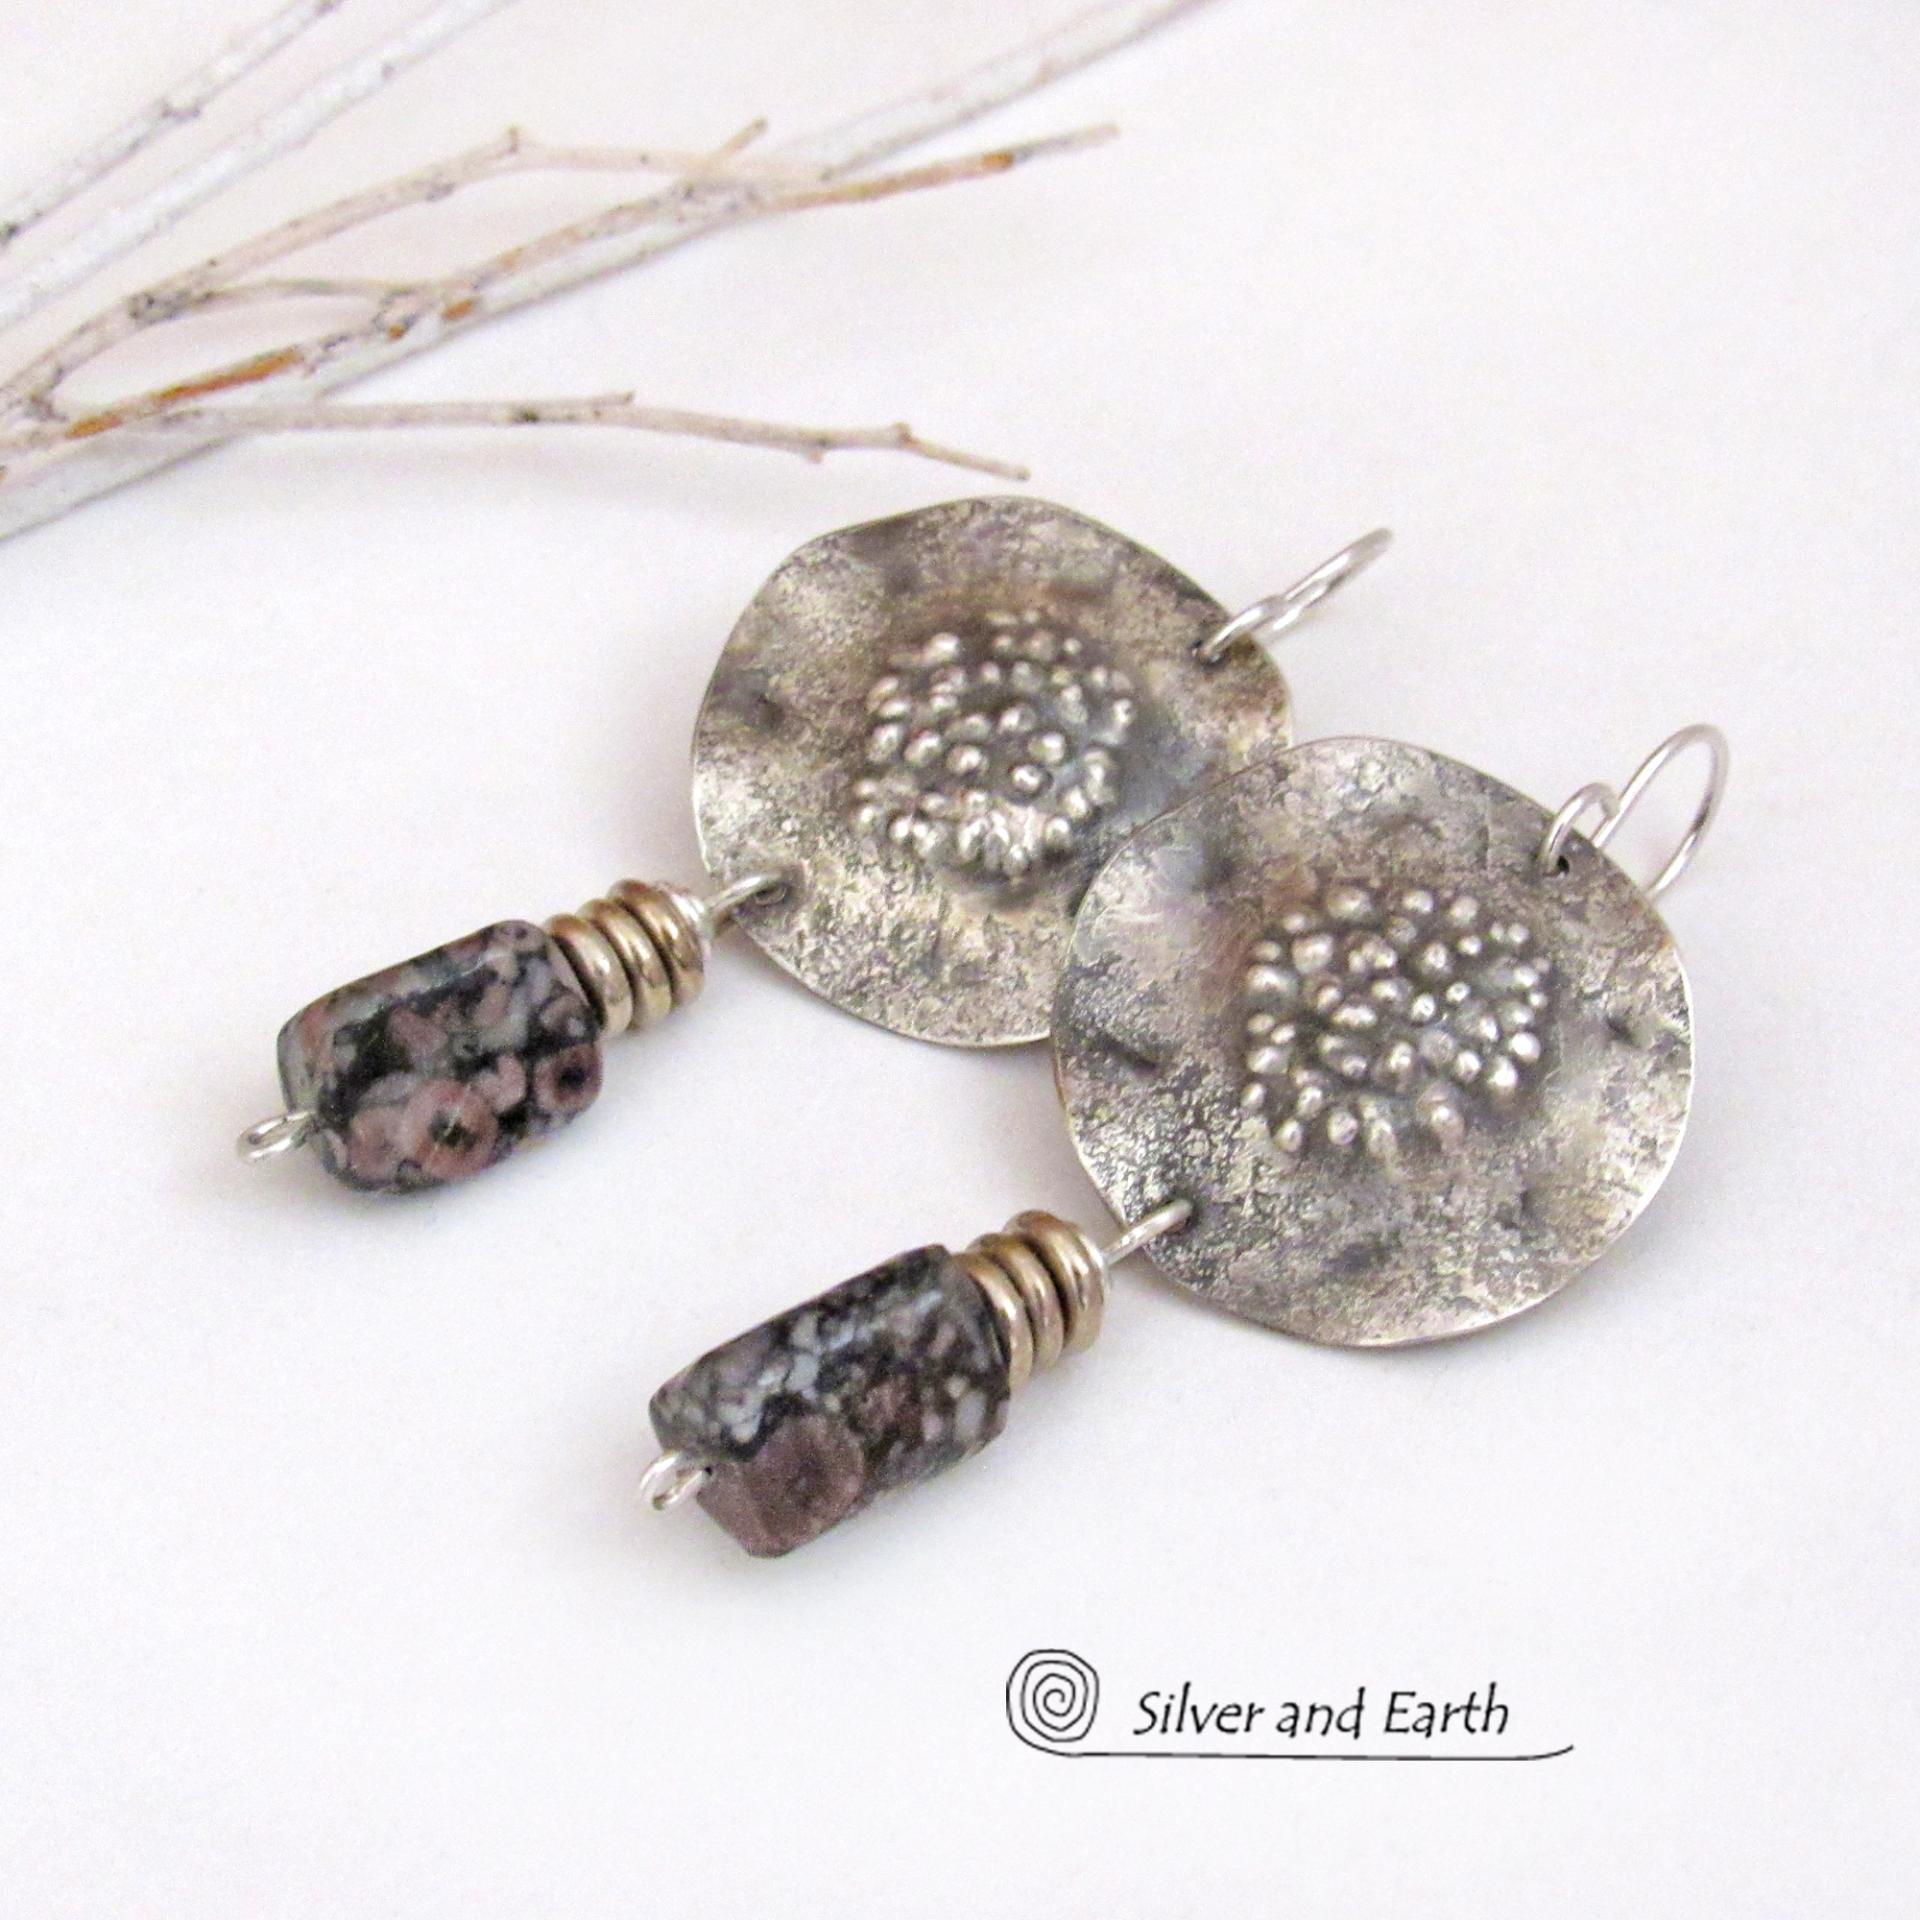 Sterling Silver Earrings with Dangling Crinoid Fossil Stones - Bold Modern Earthy Organic Natural Fossil Jewelry 